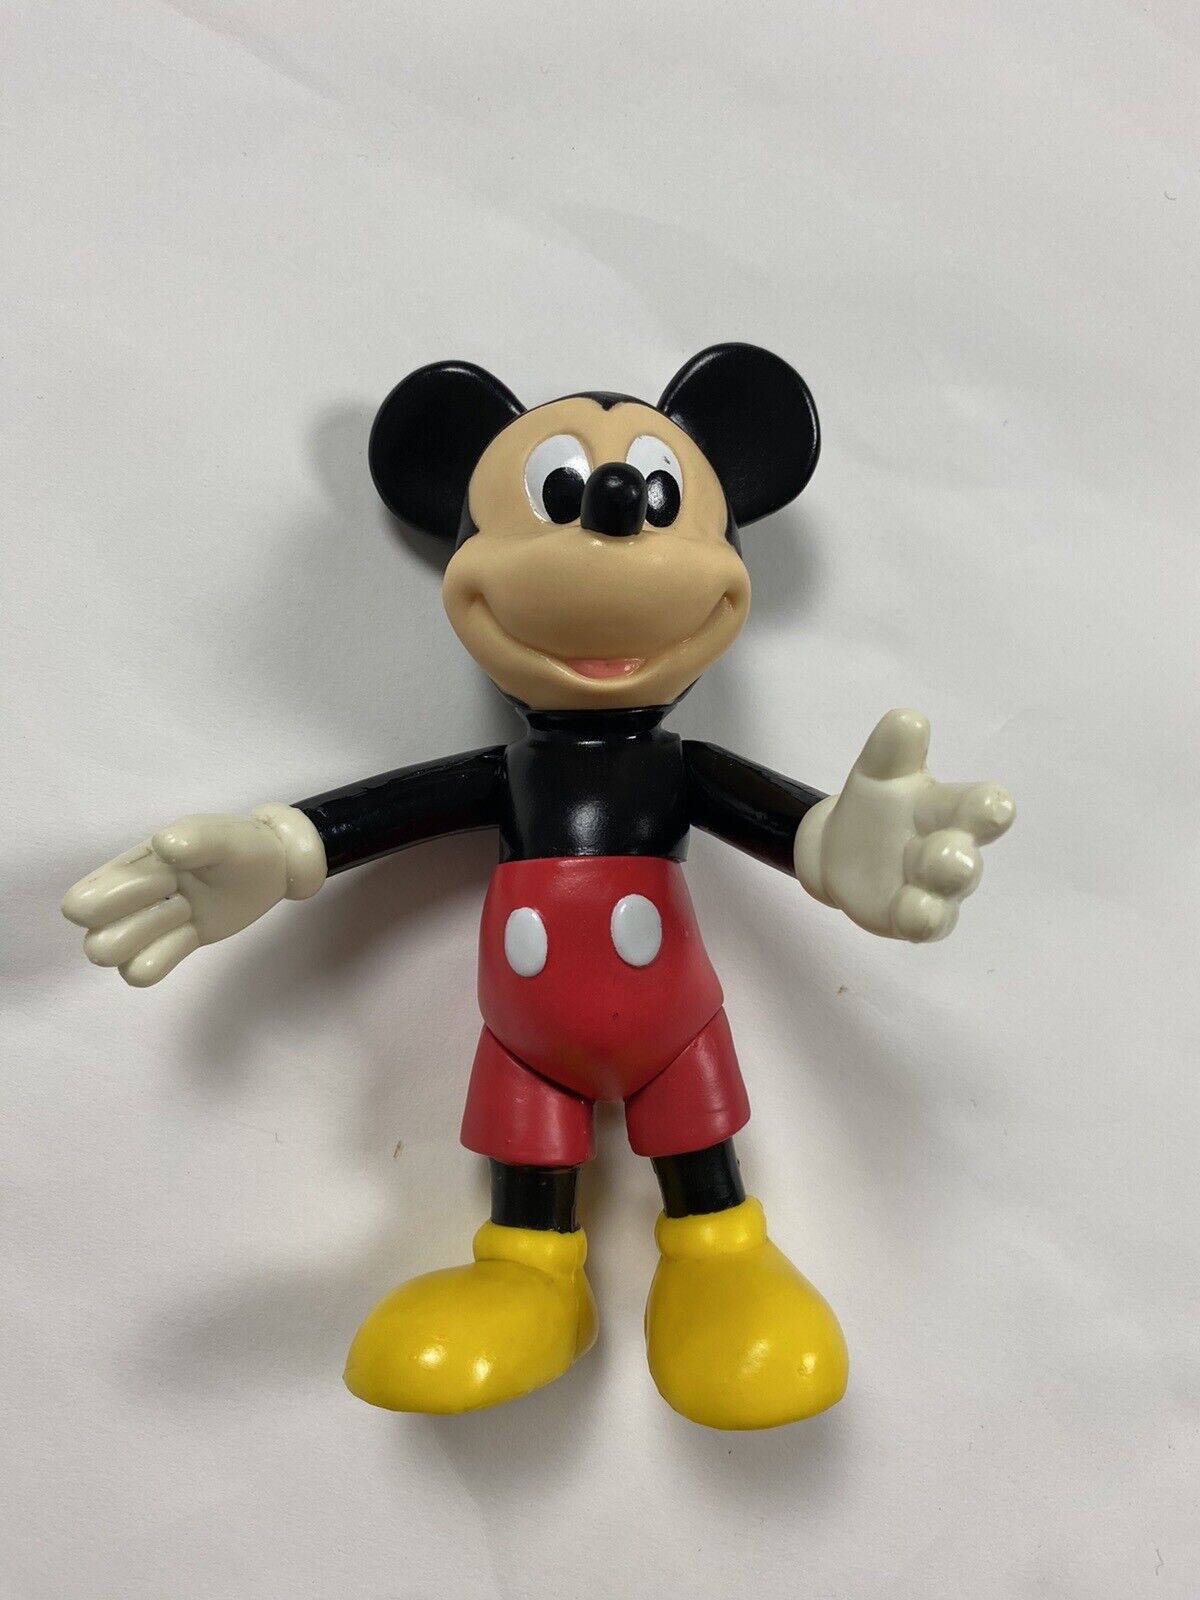 Vintage Mickey Mouse Articulated Vinyl Figure Disney Store 6.5”